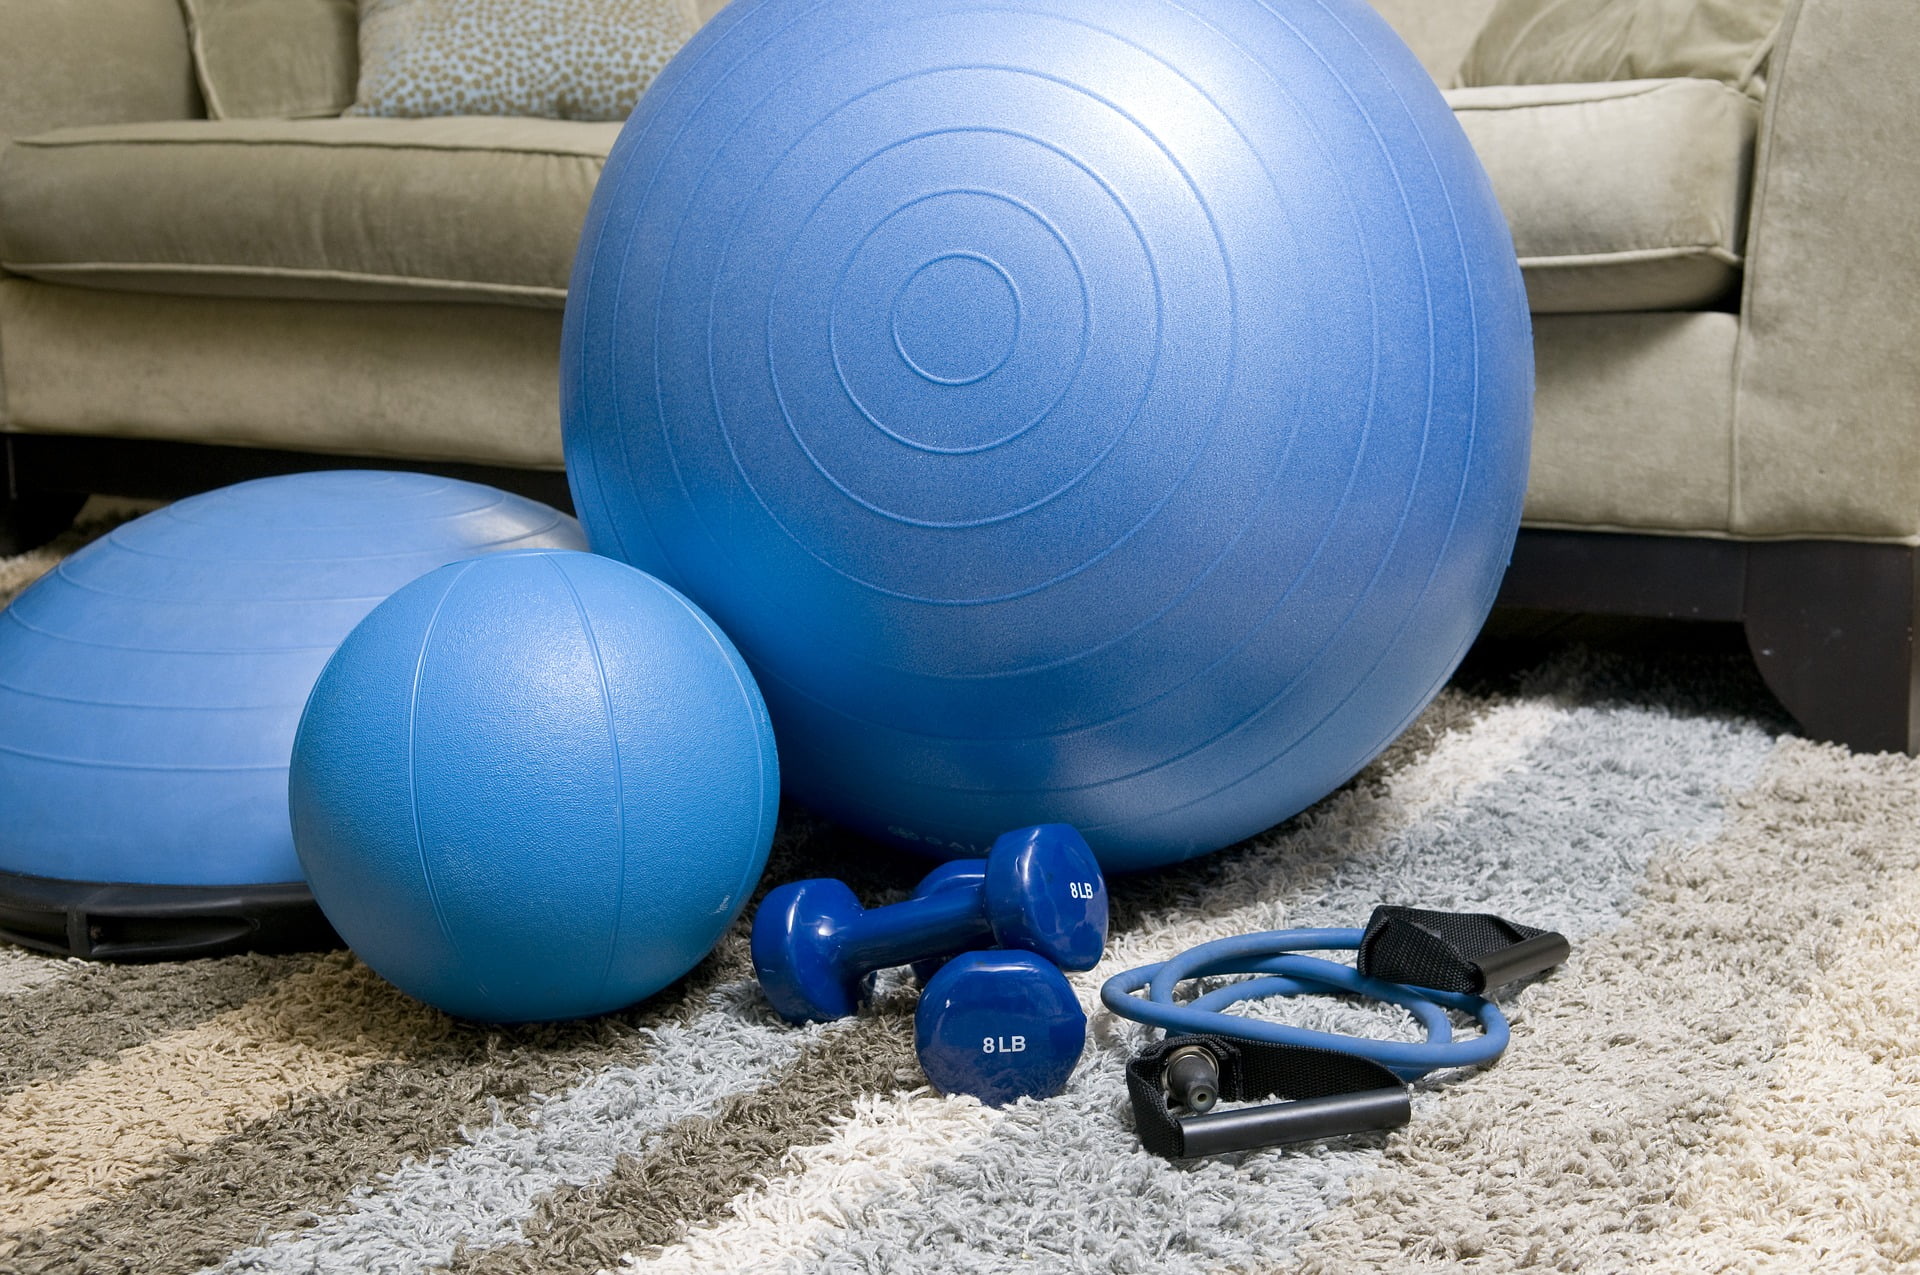 10 Key Exercises For Working Out At Home During COVID-19